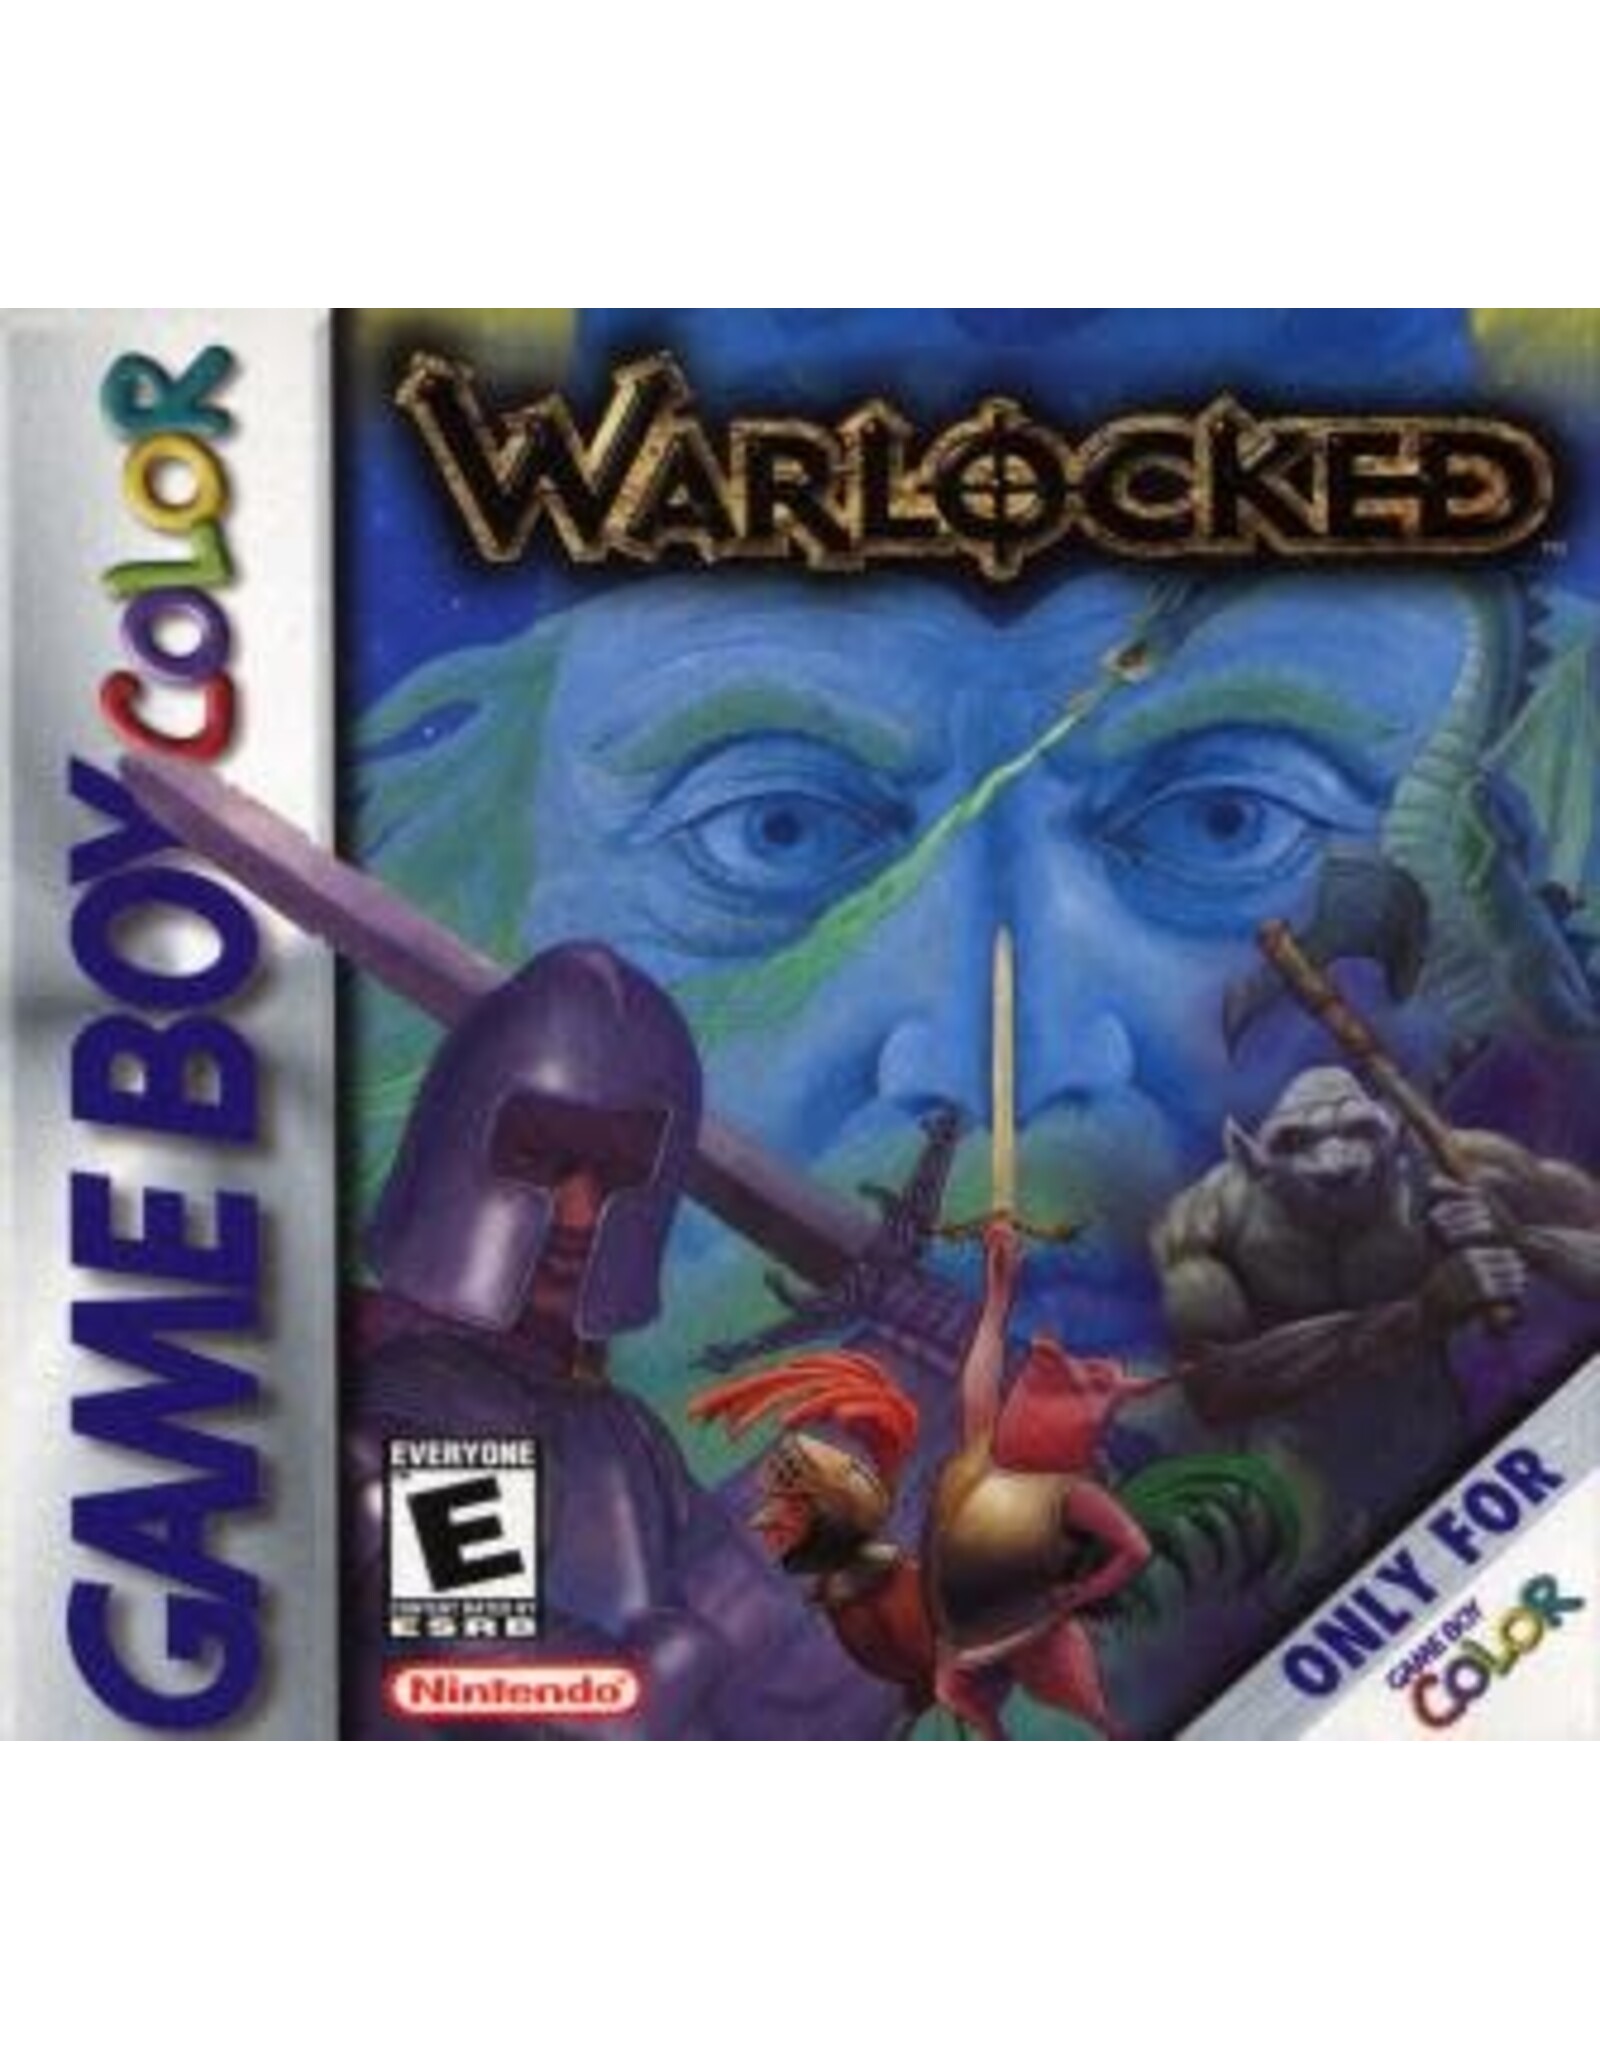 Game Boy Color Warlocked (Cart Only)